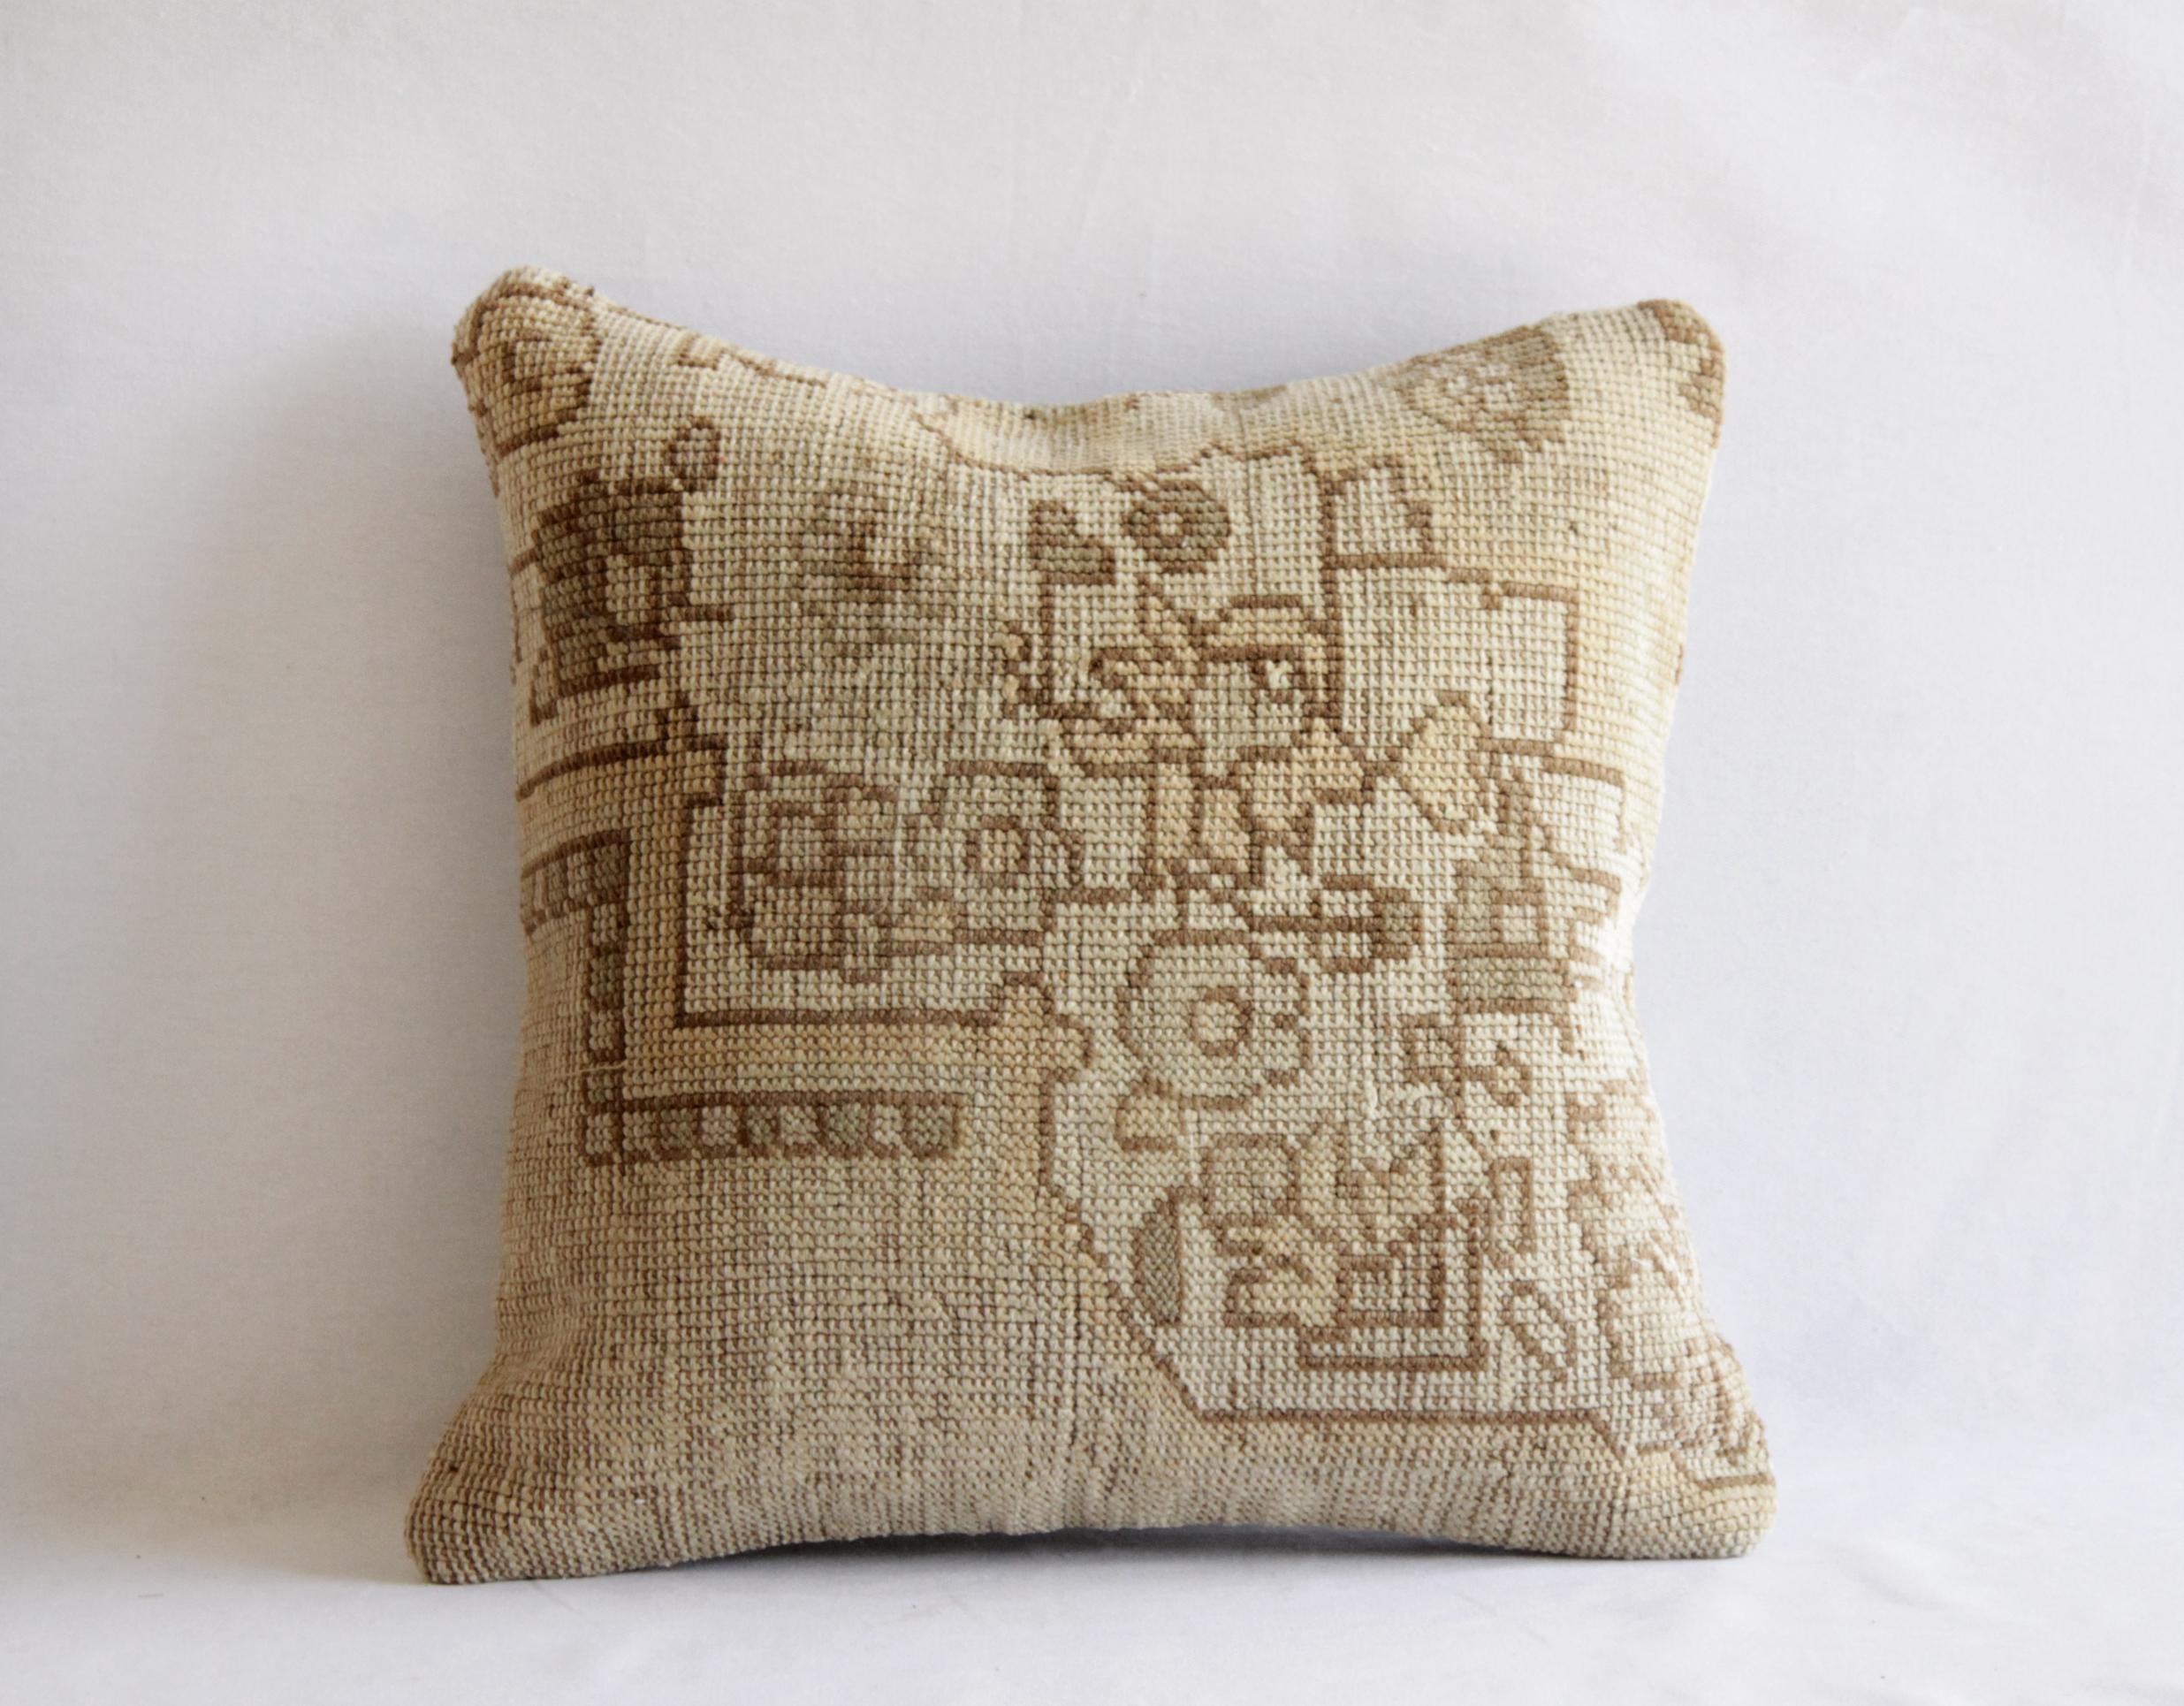 Vintage Turkish Kilim rug pillow in natural light earthy natural tones, with a beautiful pattern. 
Measures: 16 x 16 
 Backside is sewn with a natural coordinating canvas material. Insert not included. If you need an insert, we can add one for an